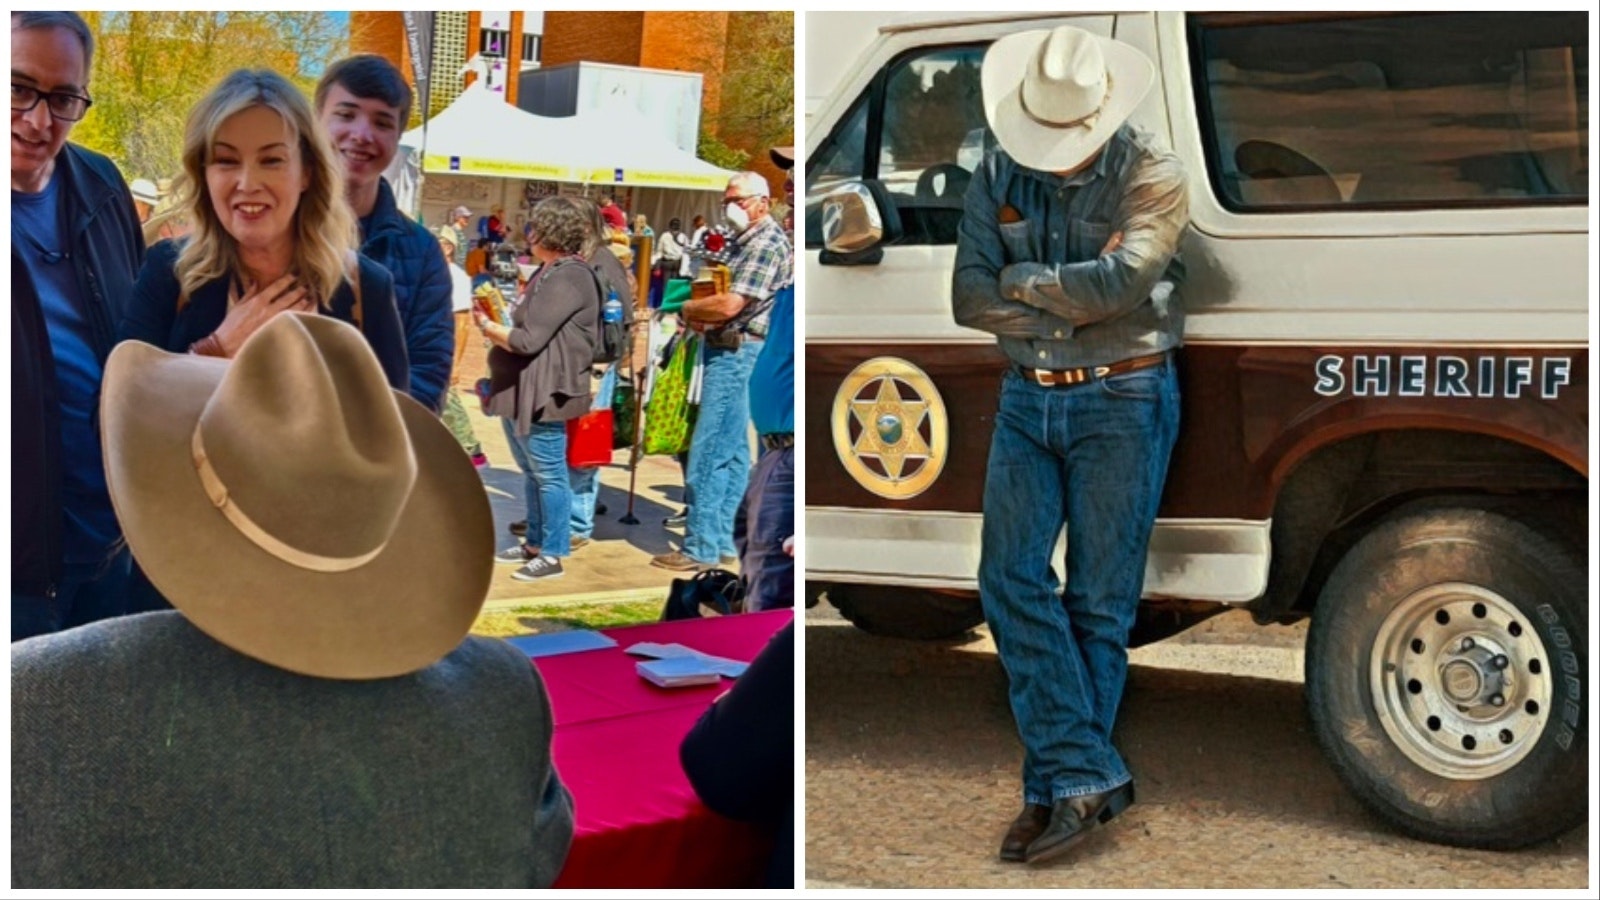 Fans of Wyoming author Craig Johnson and his popular Sheriff Walt Longmire character always show up in force whenever he has a book signing or other event.